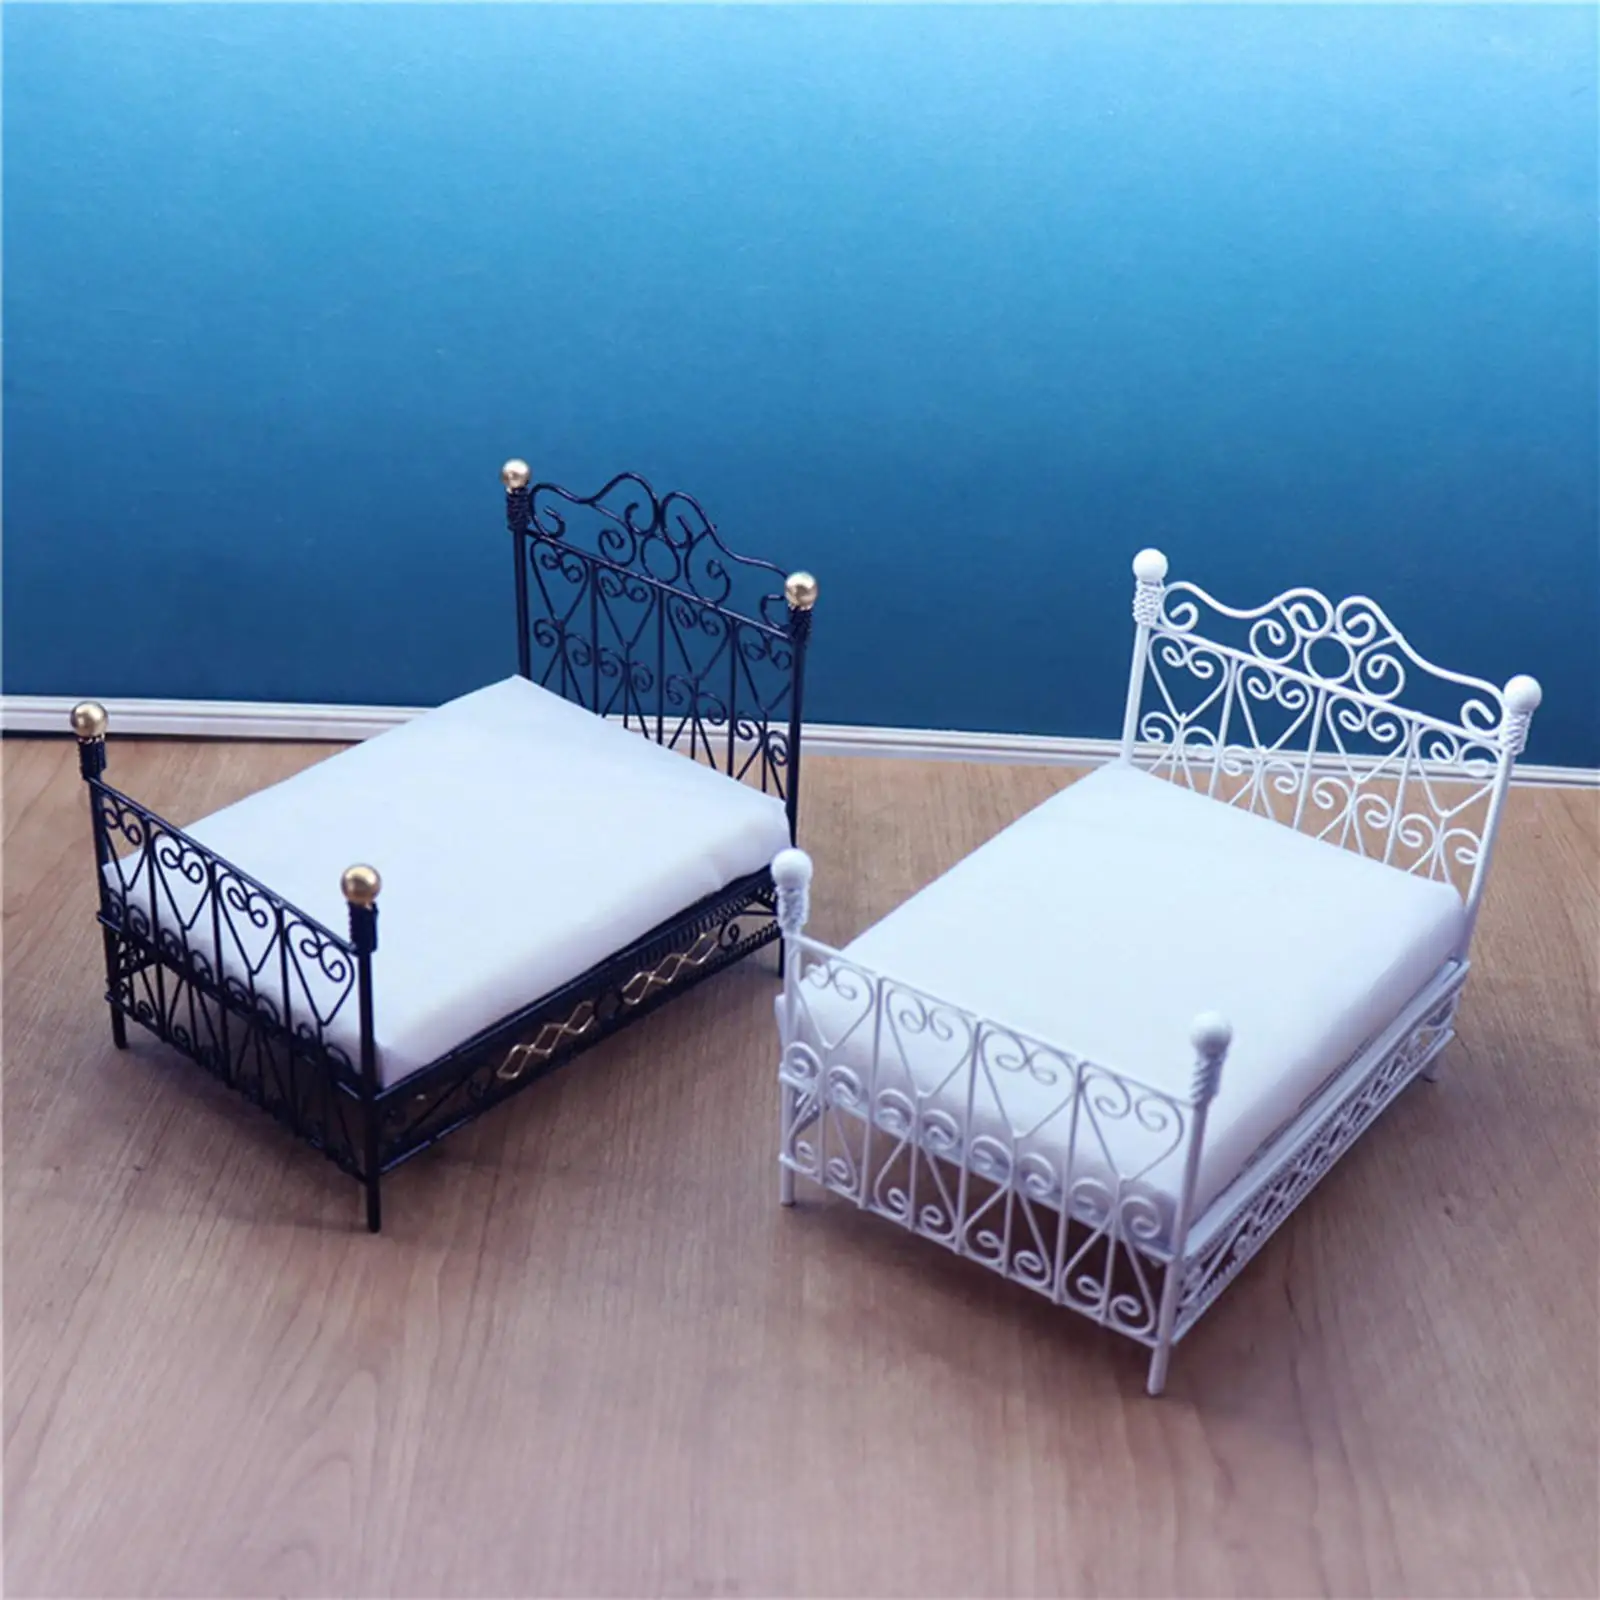 Miniature Double Bed Furniture for 1:12 Scale Doll House Bedroom Decor